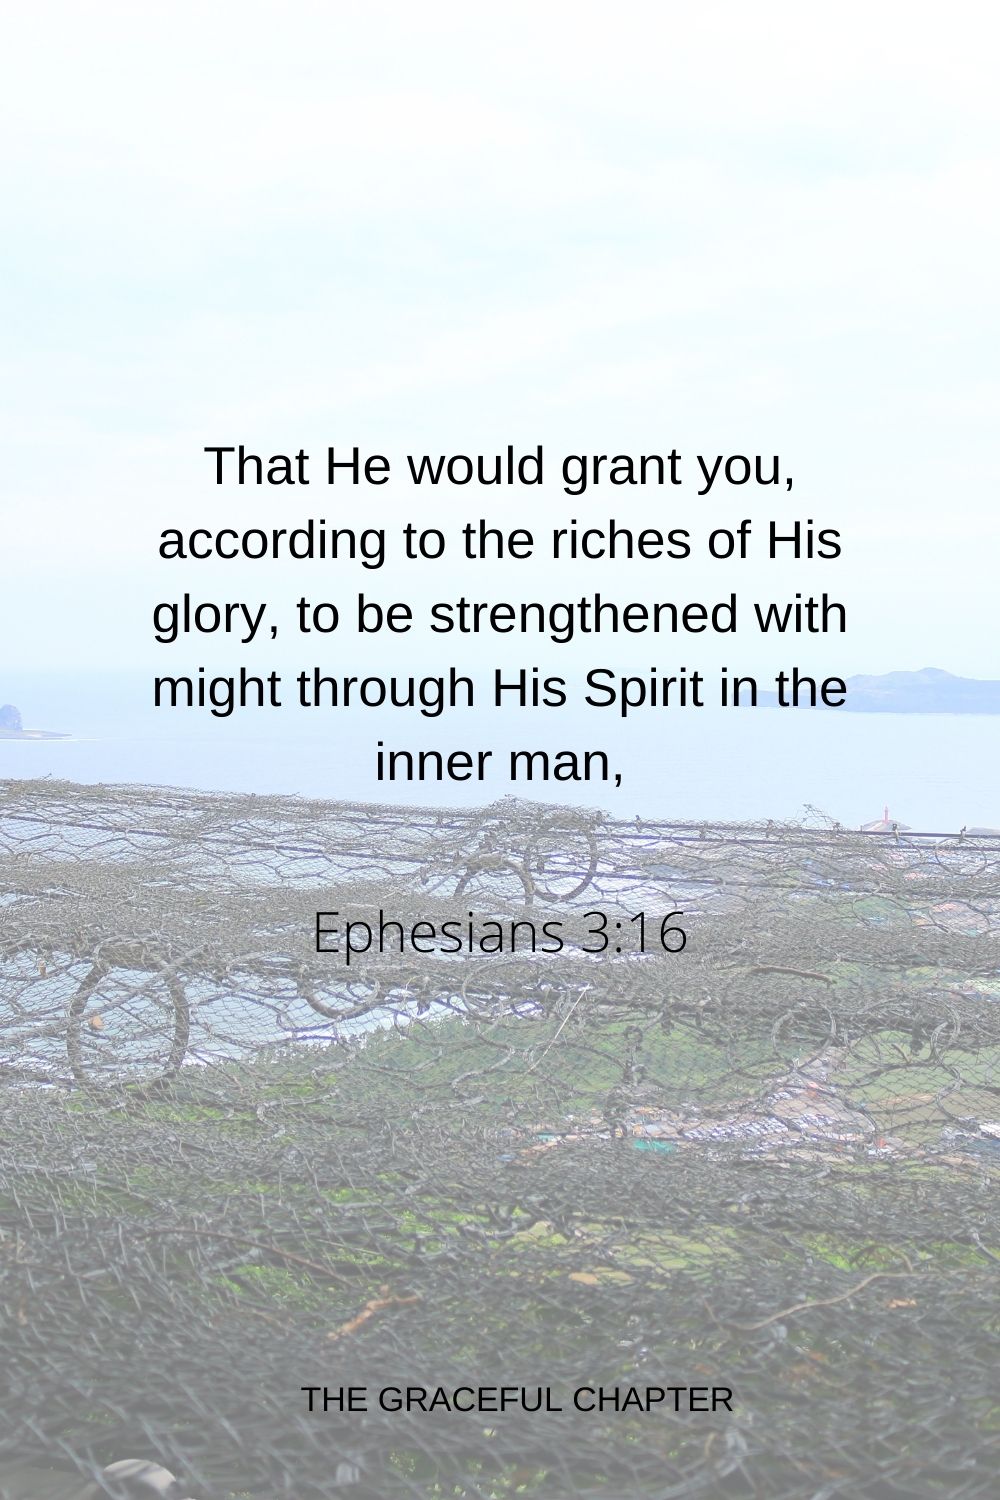 That He would grant you, according to the riches of His glory, to be strengthened with might through His Spirit in the inner man, Ephesians 3:16